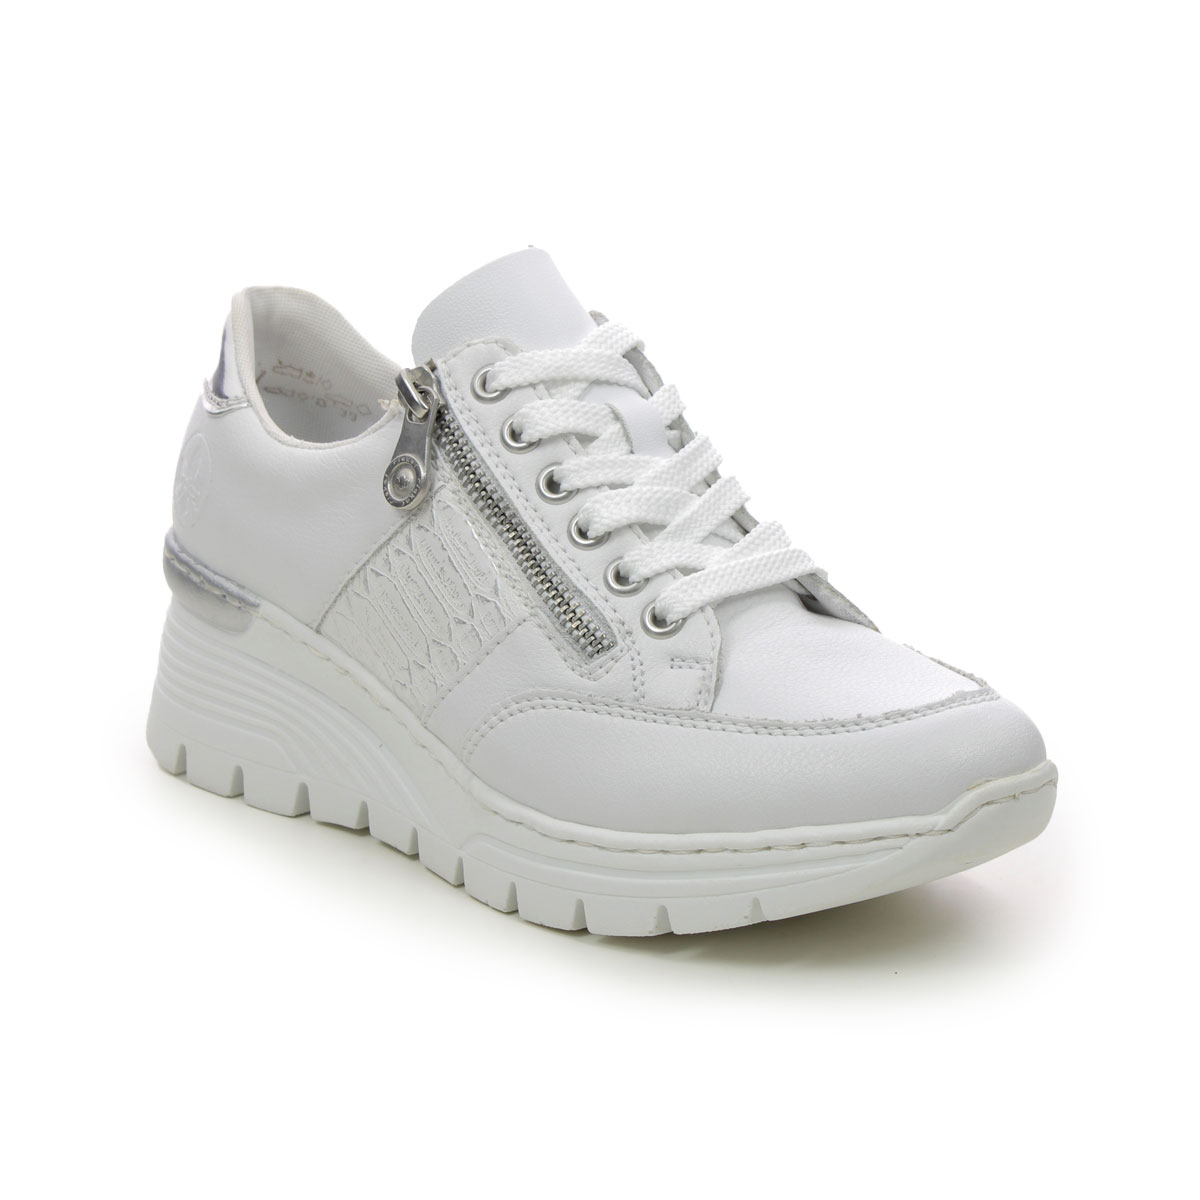 Rieker N8322-80 White Leather Womens trainers in a Plain Leather and Man-made in Size 37